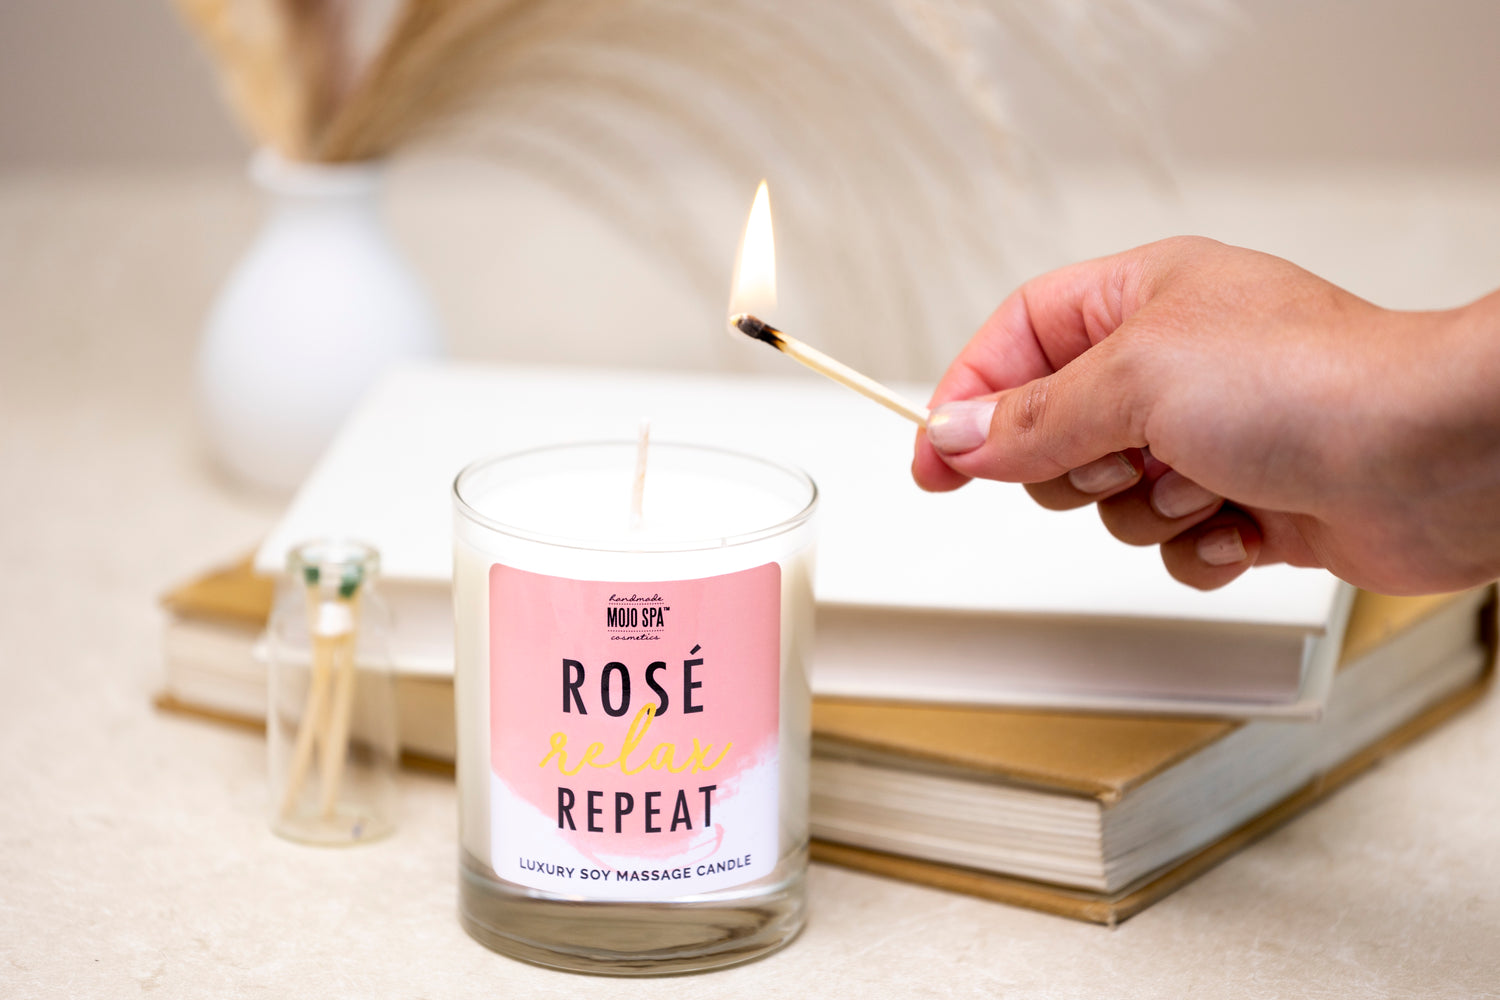 Rosé. Relax. Repeat. Luxury Soy Massage Candle – Mojo Spa